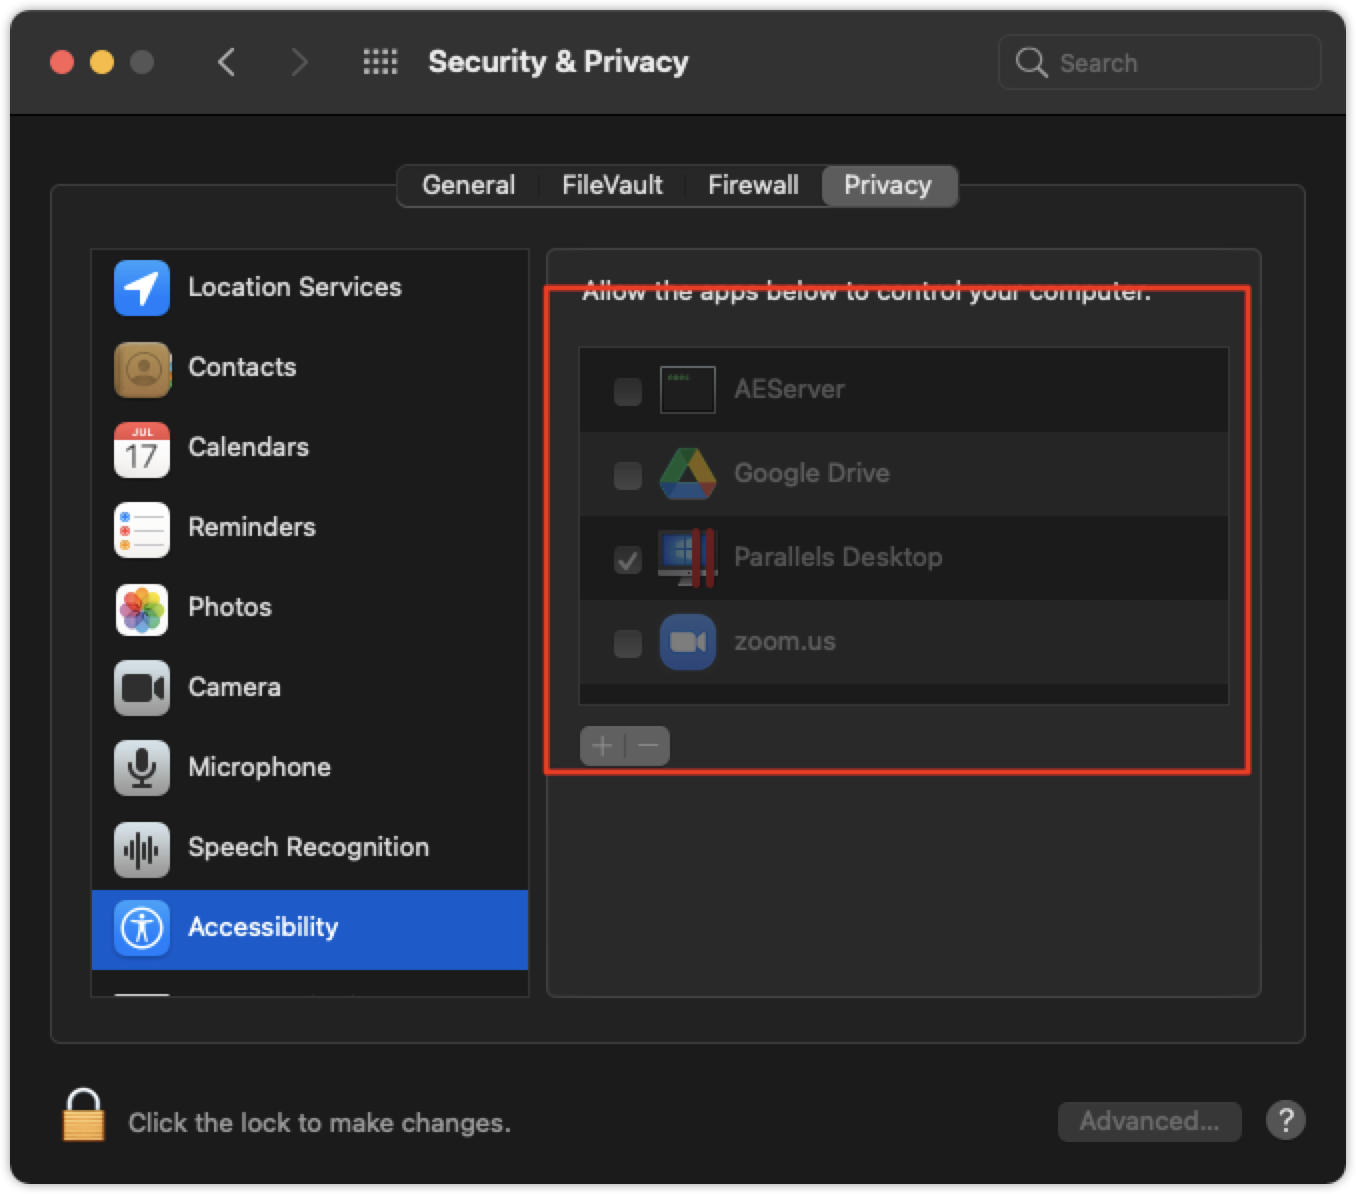 Security and Privacy modal with Accessibility selected and list of apps highlighted